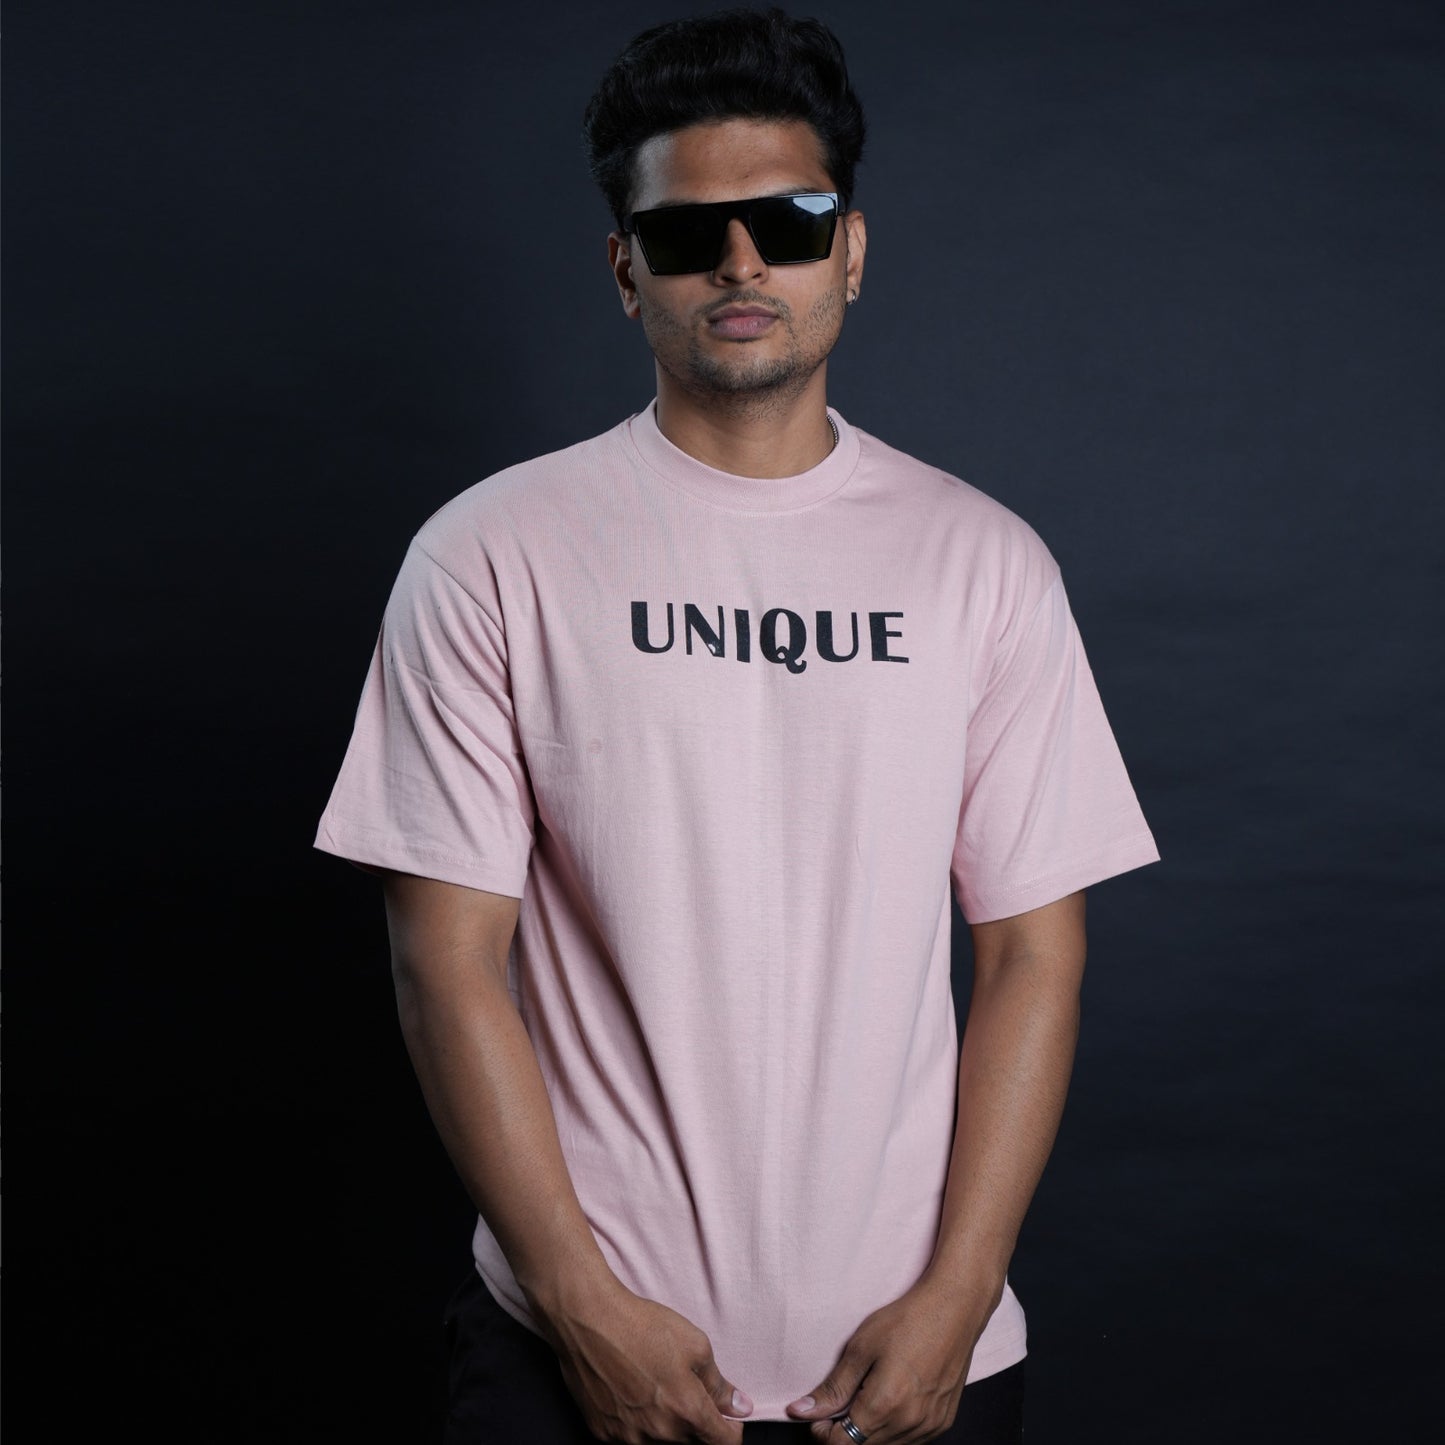 Whimsical Blush: Baby Pink Printed T-Shirt ( Available in M Size )